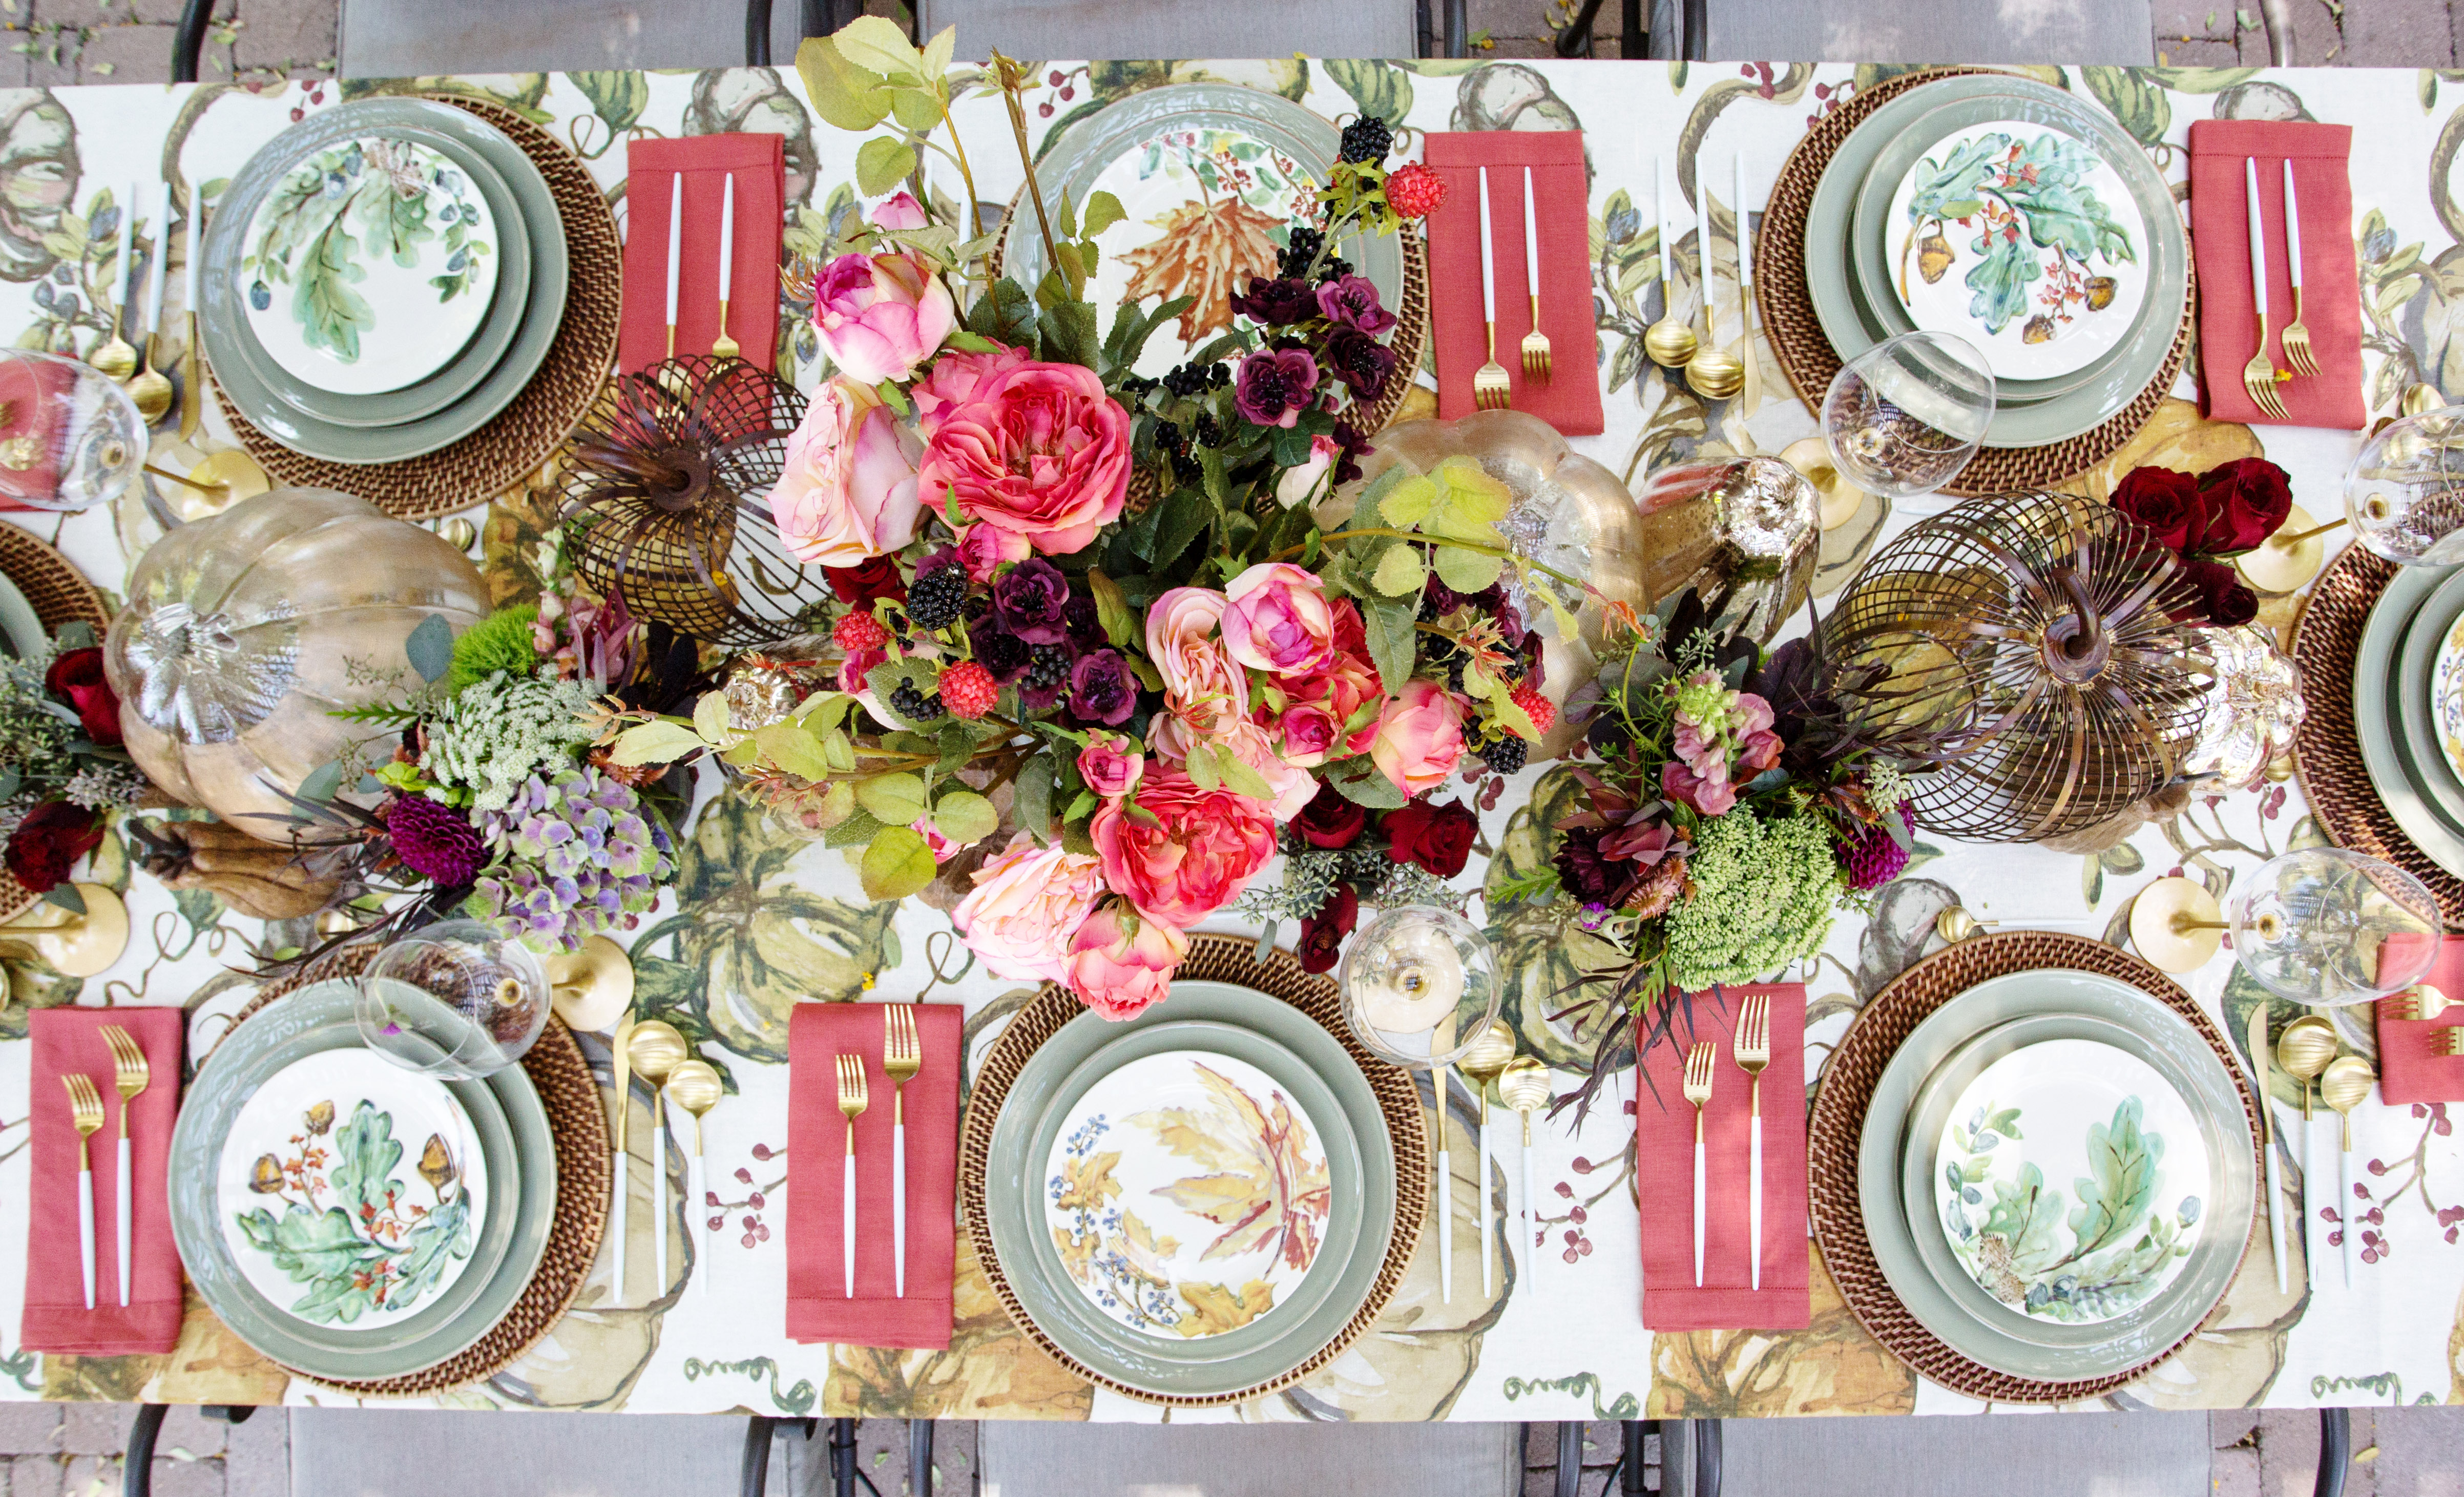 Ready for Fall Entertaining? Meet your Perfect Harvest Supper Table